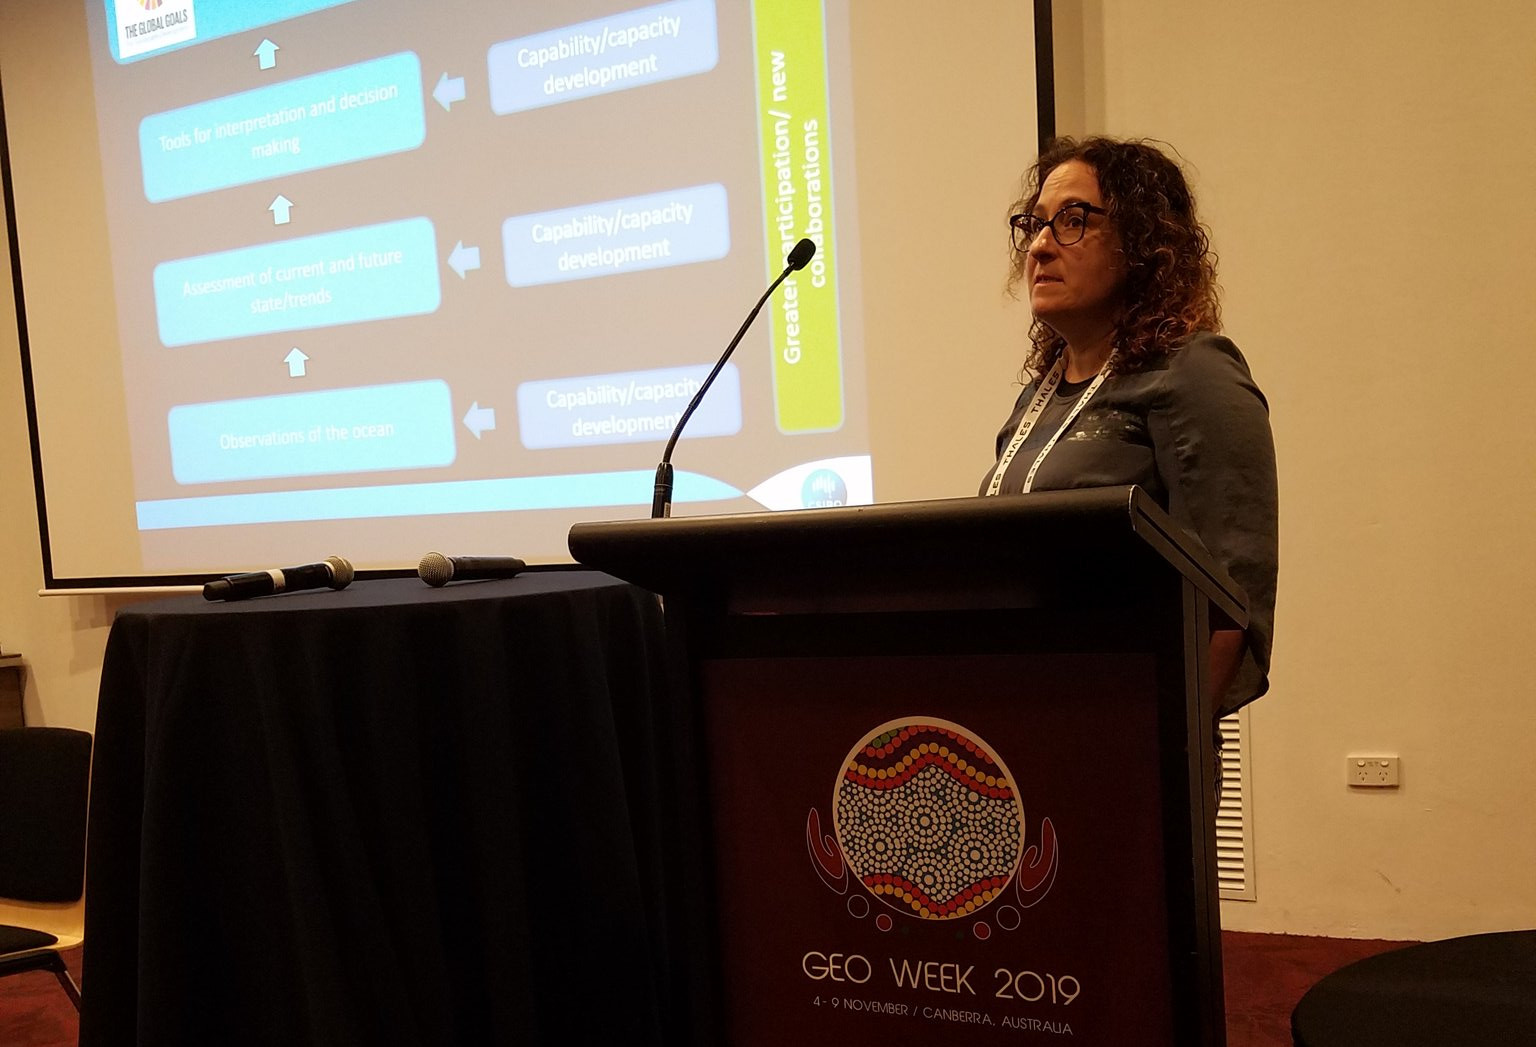 Dr. Karen Evans (CSIRO) presents the UN Decade of Ocean Science for Sustainable Development at the GEO Week 2019 side event.